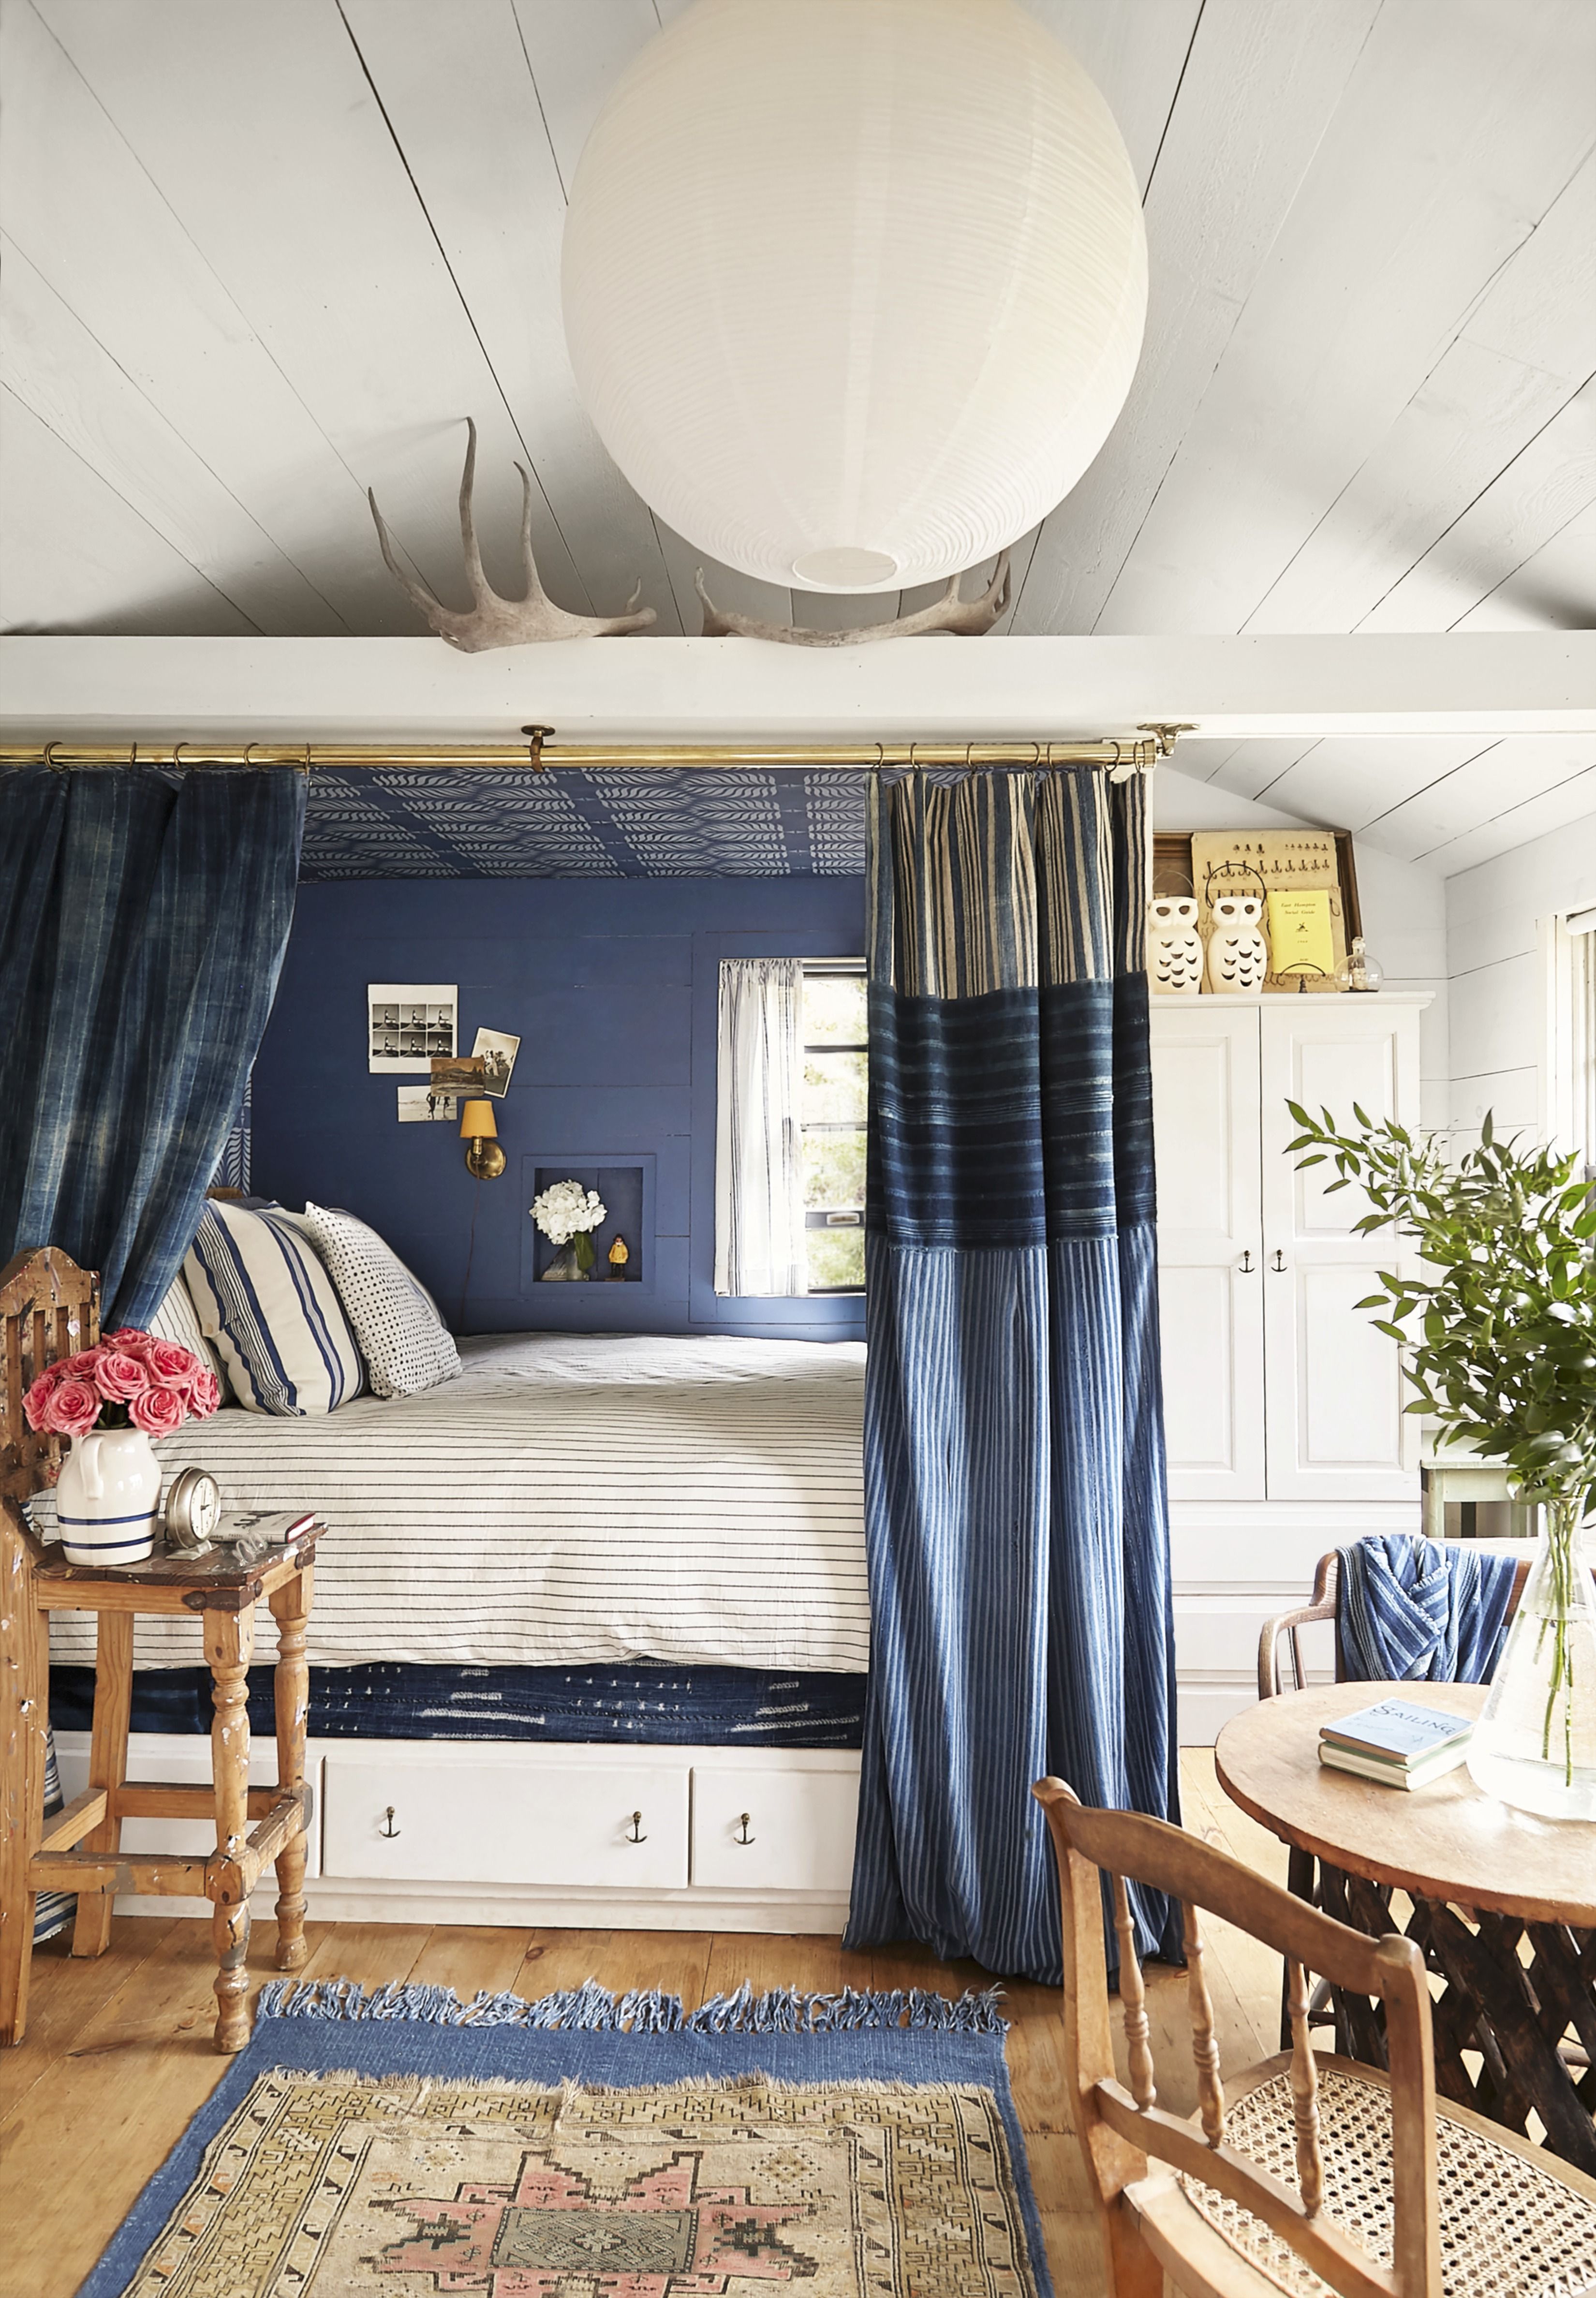 These 10 Bedroom Decorating Ideas Will Upscale The Look Of Your Sleeping  Space